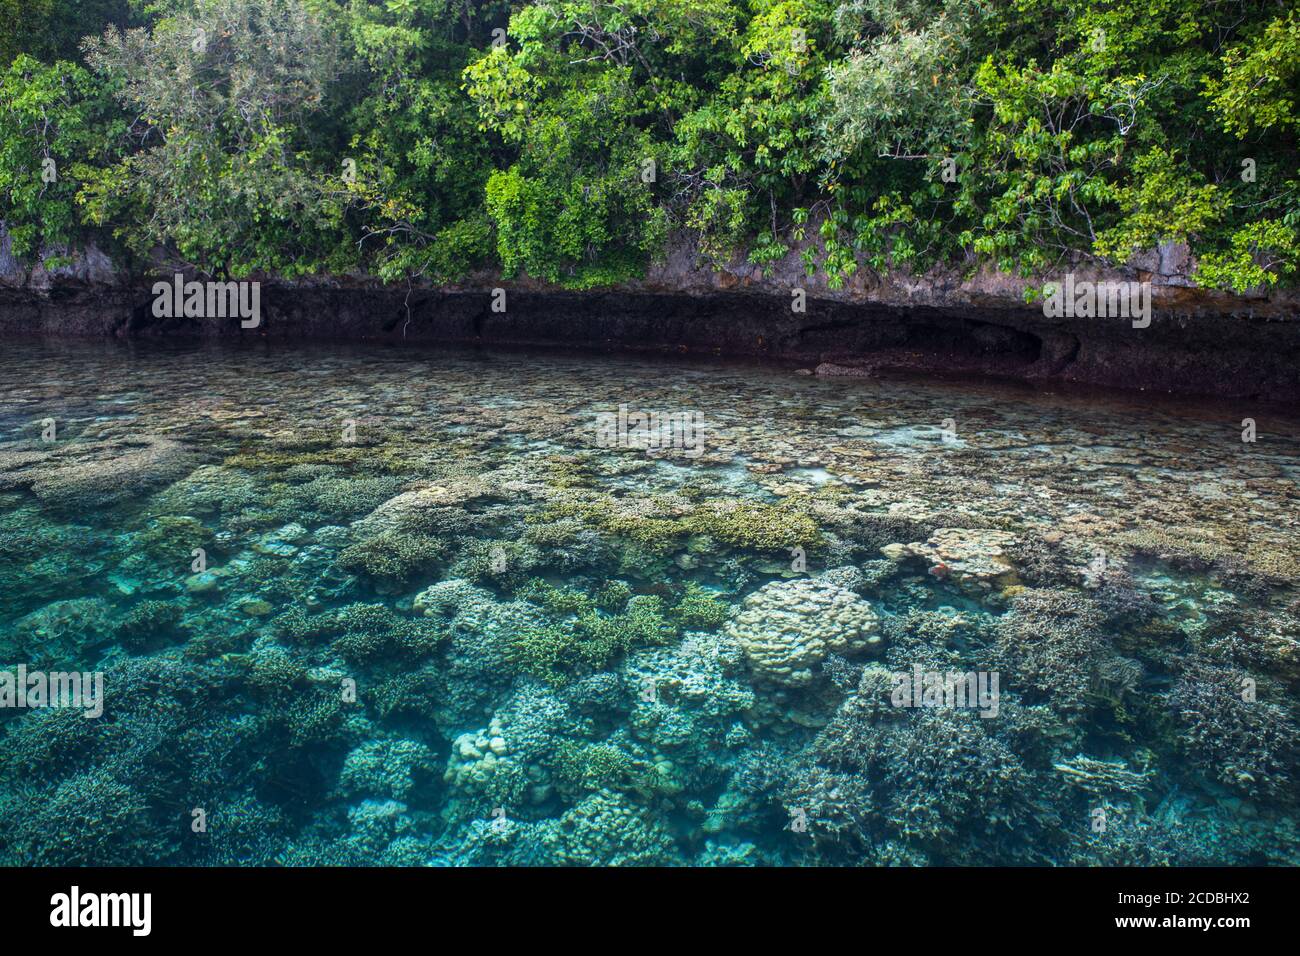 Healthy corals thrive in the shallows along the edge of a limestone island in Palau's lagoon. Palau is known for its amazing maze of Rock Islands. Stock Photo